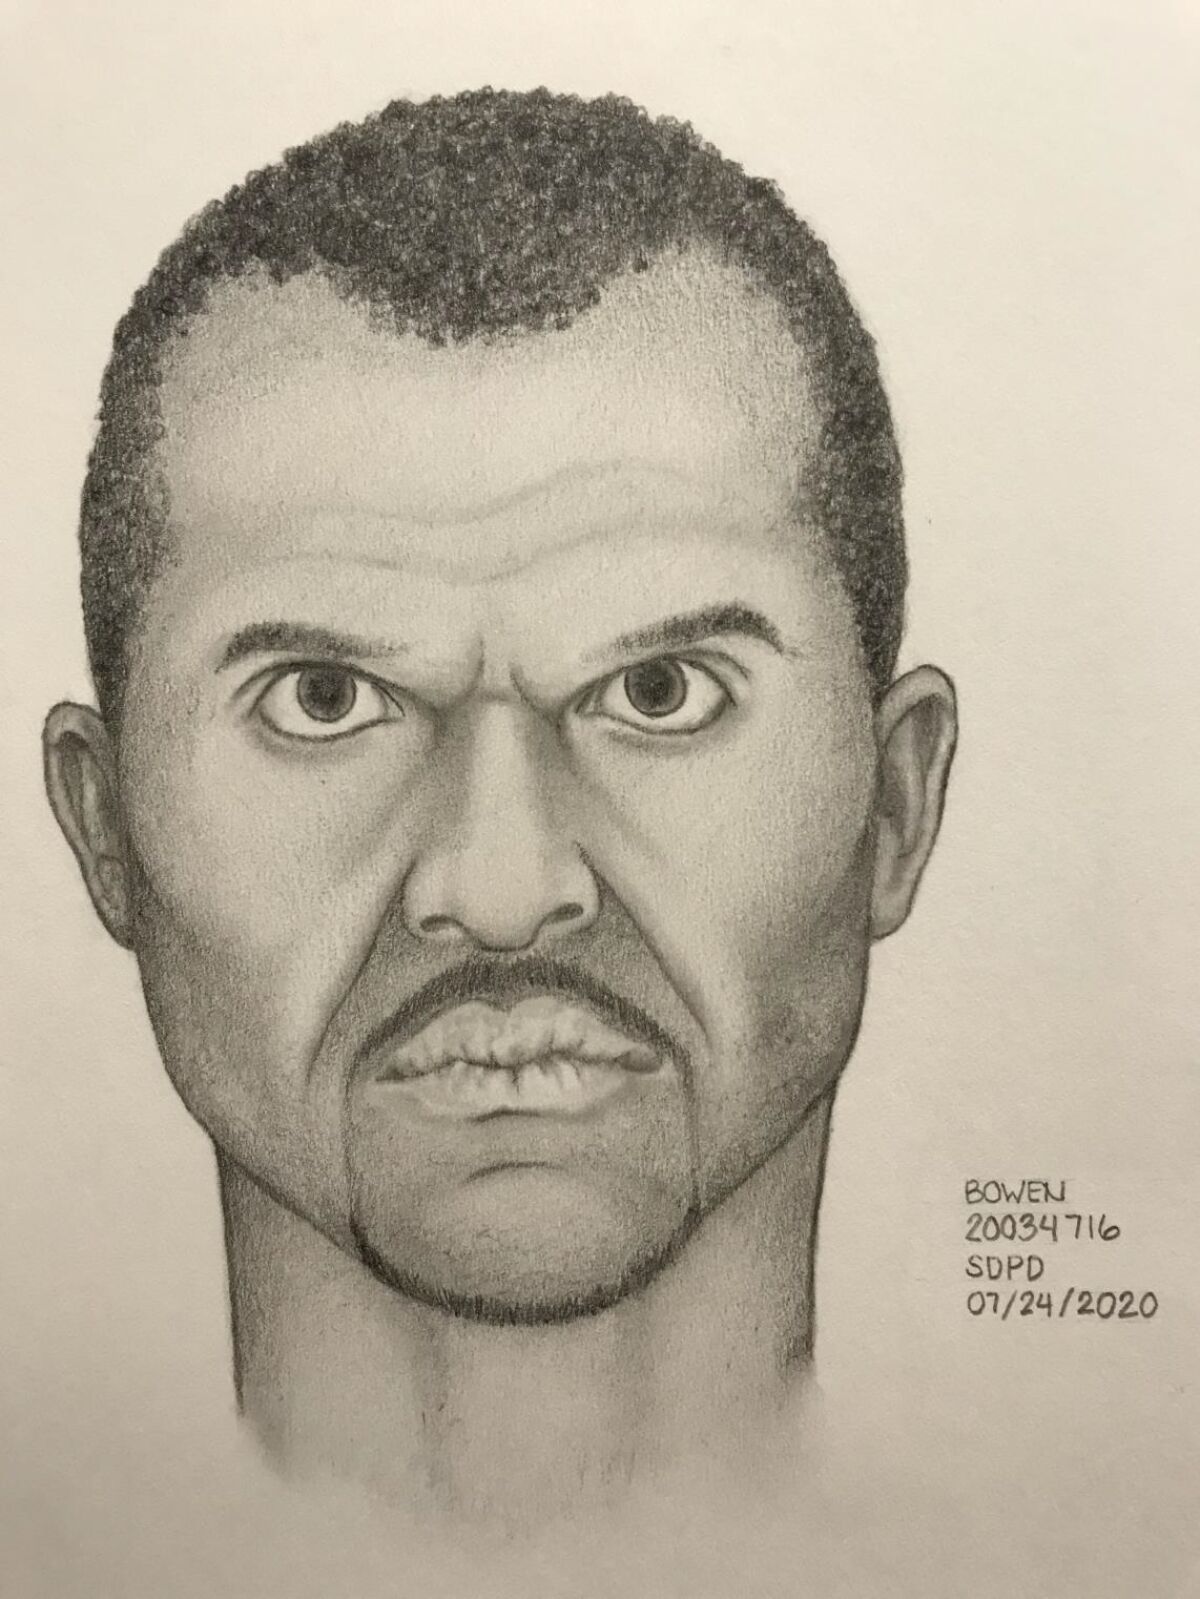 Investigators say this sketch depicts the man who strangled and stabbed another man July 11 at Emerald Hills Park.